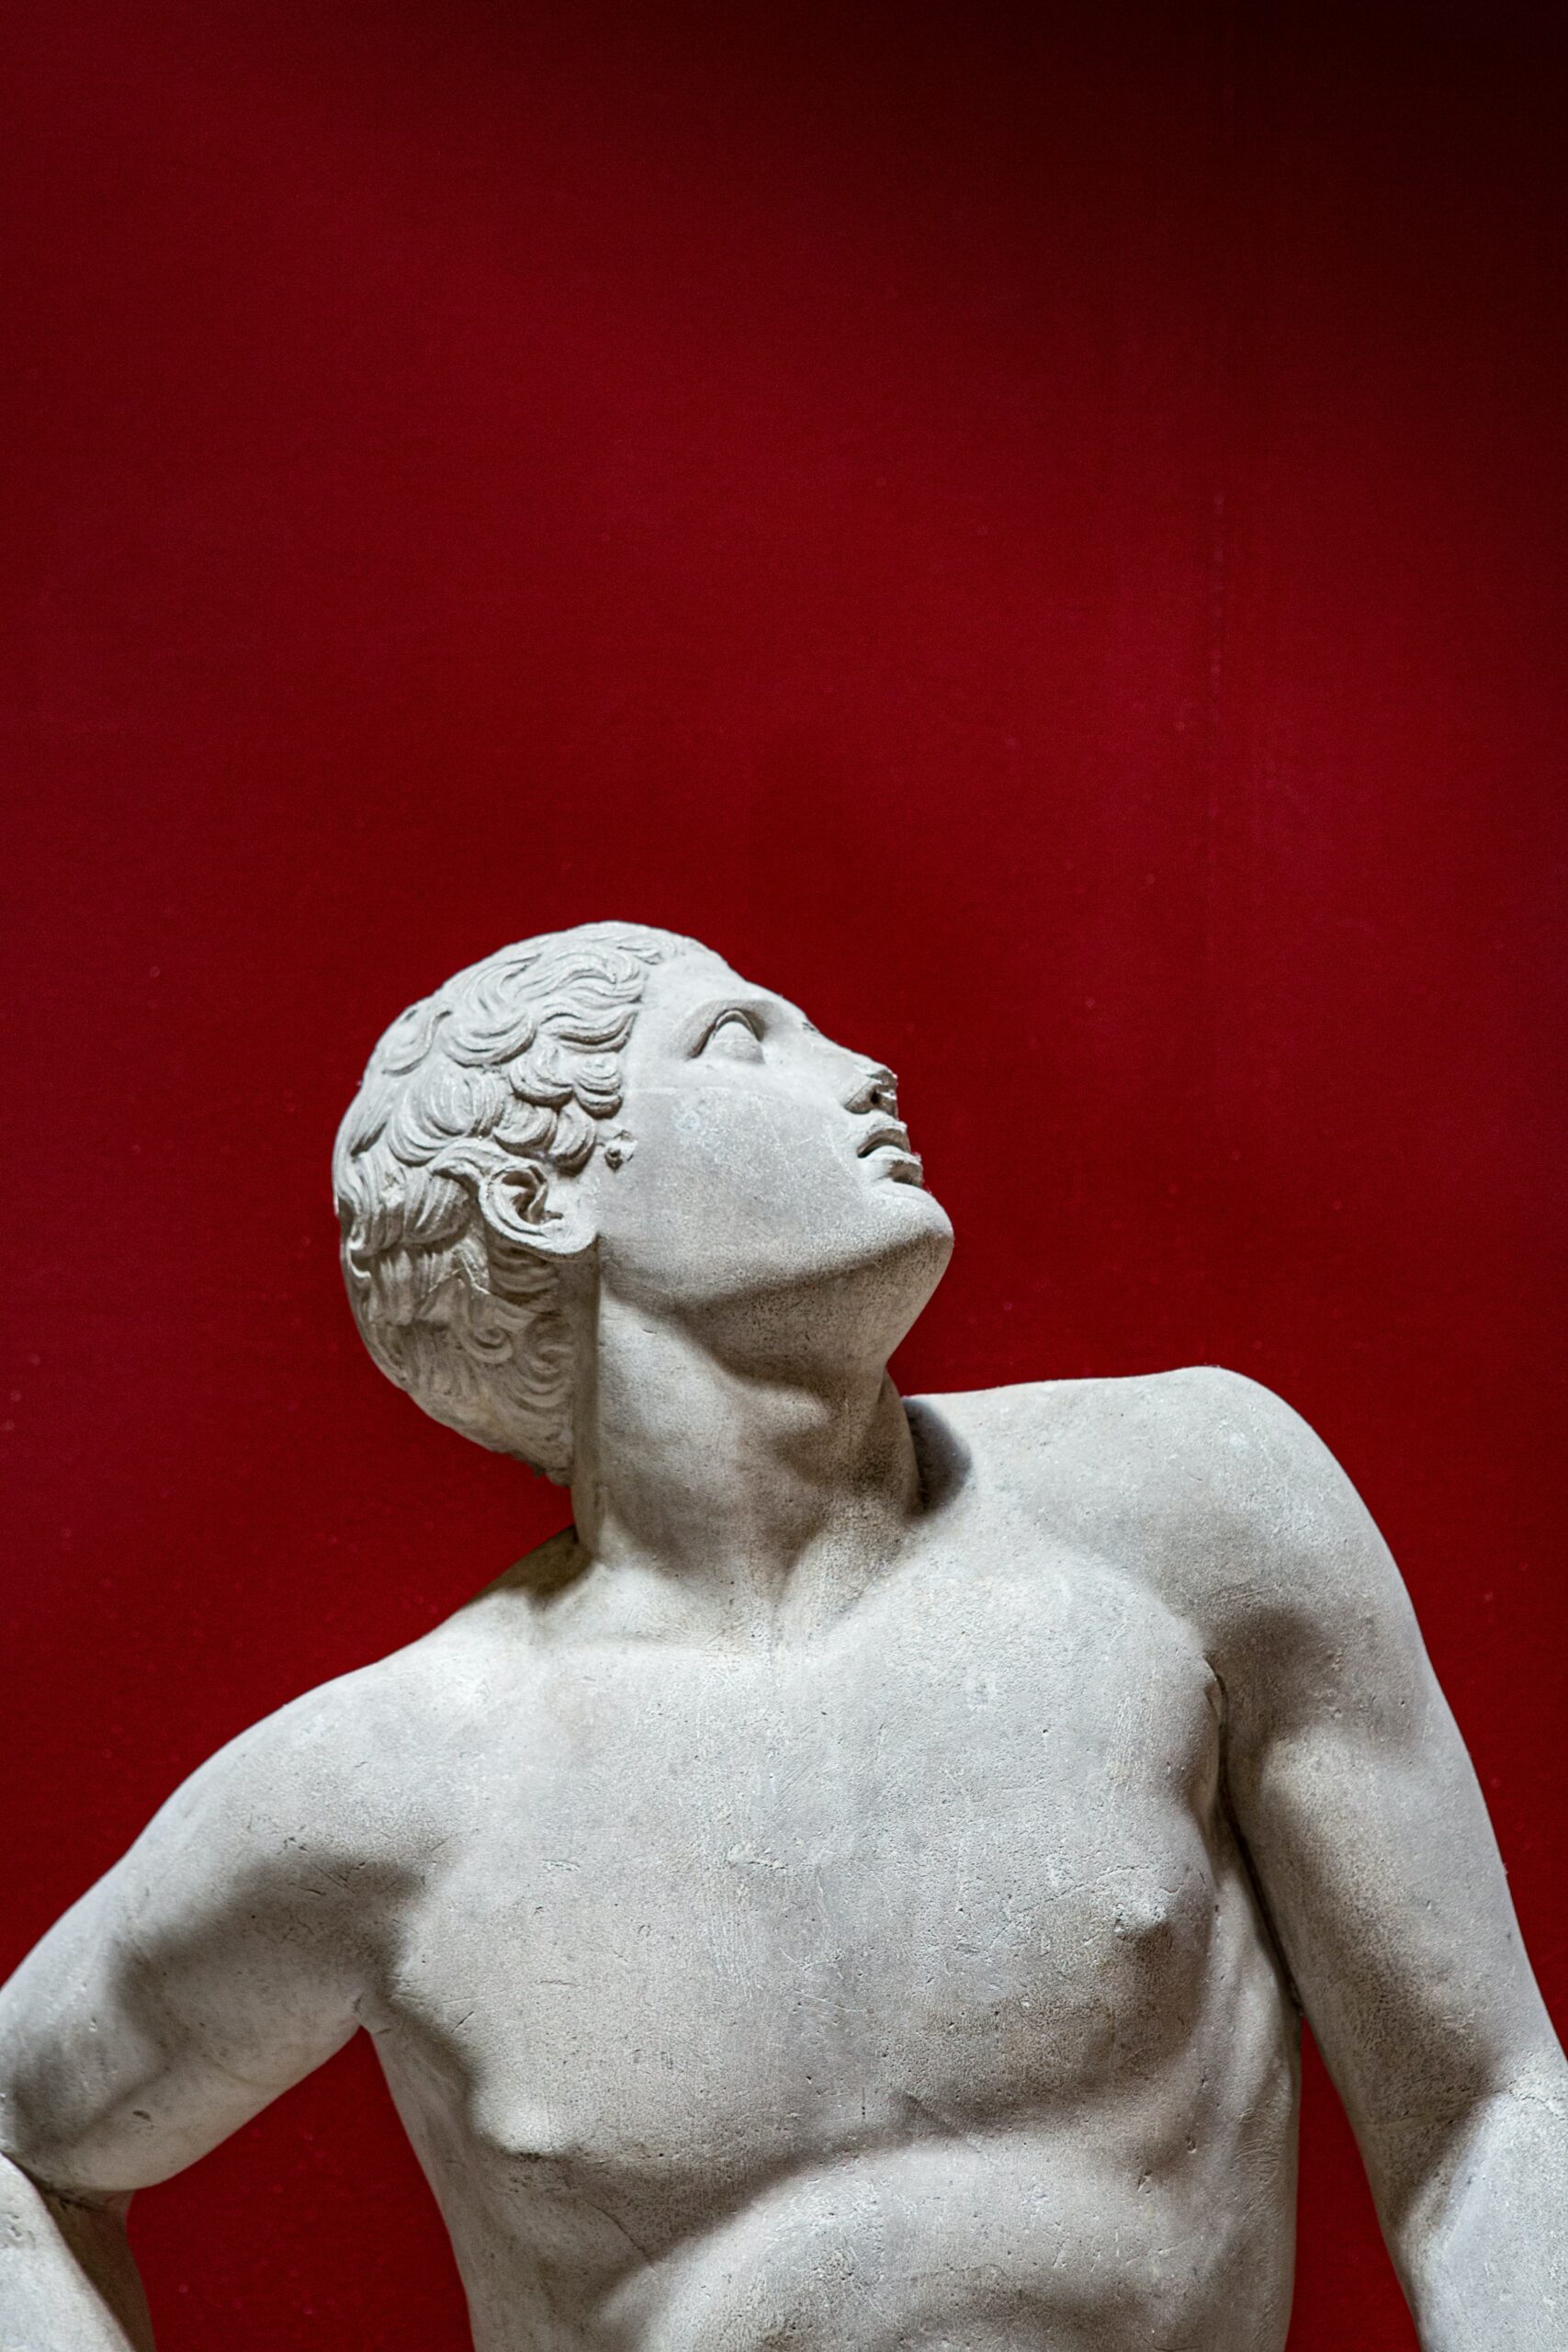 A human statue looking up behind a red background.